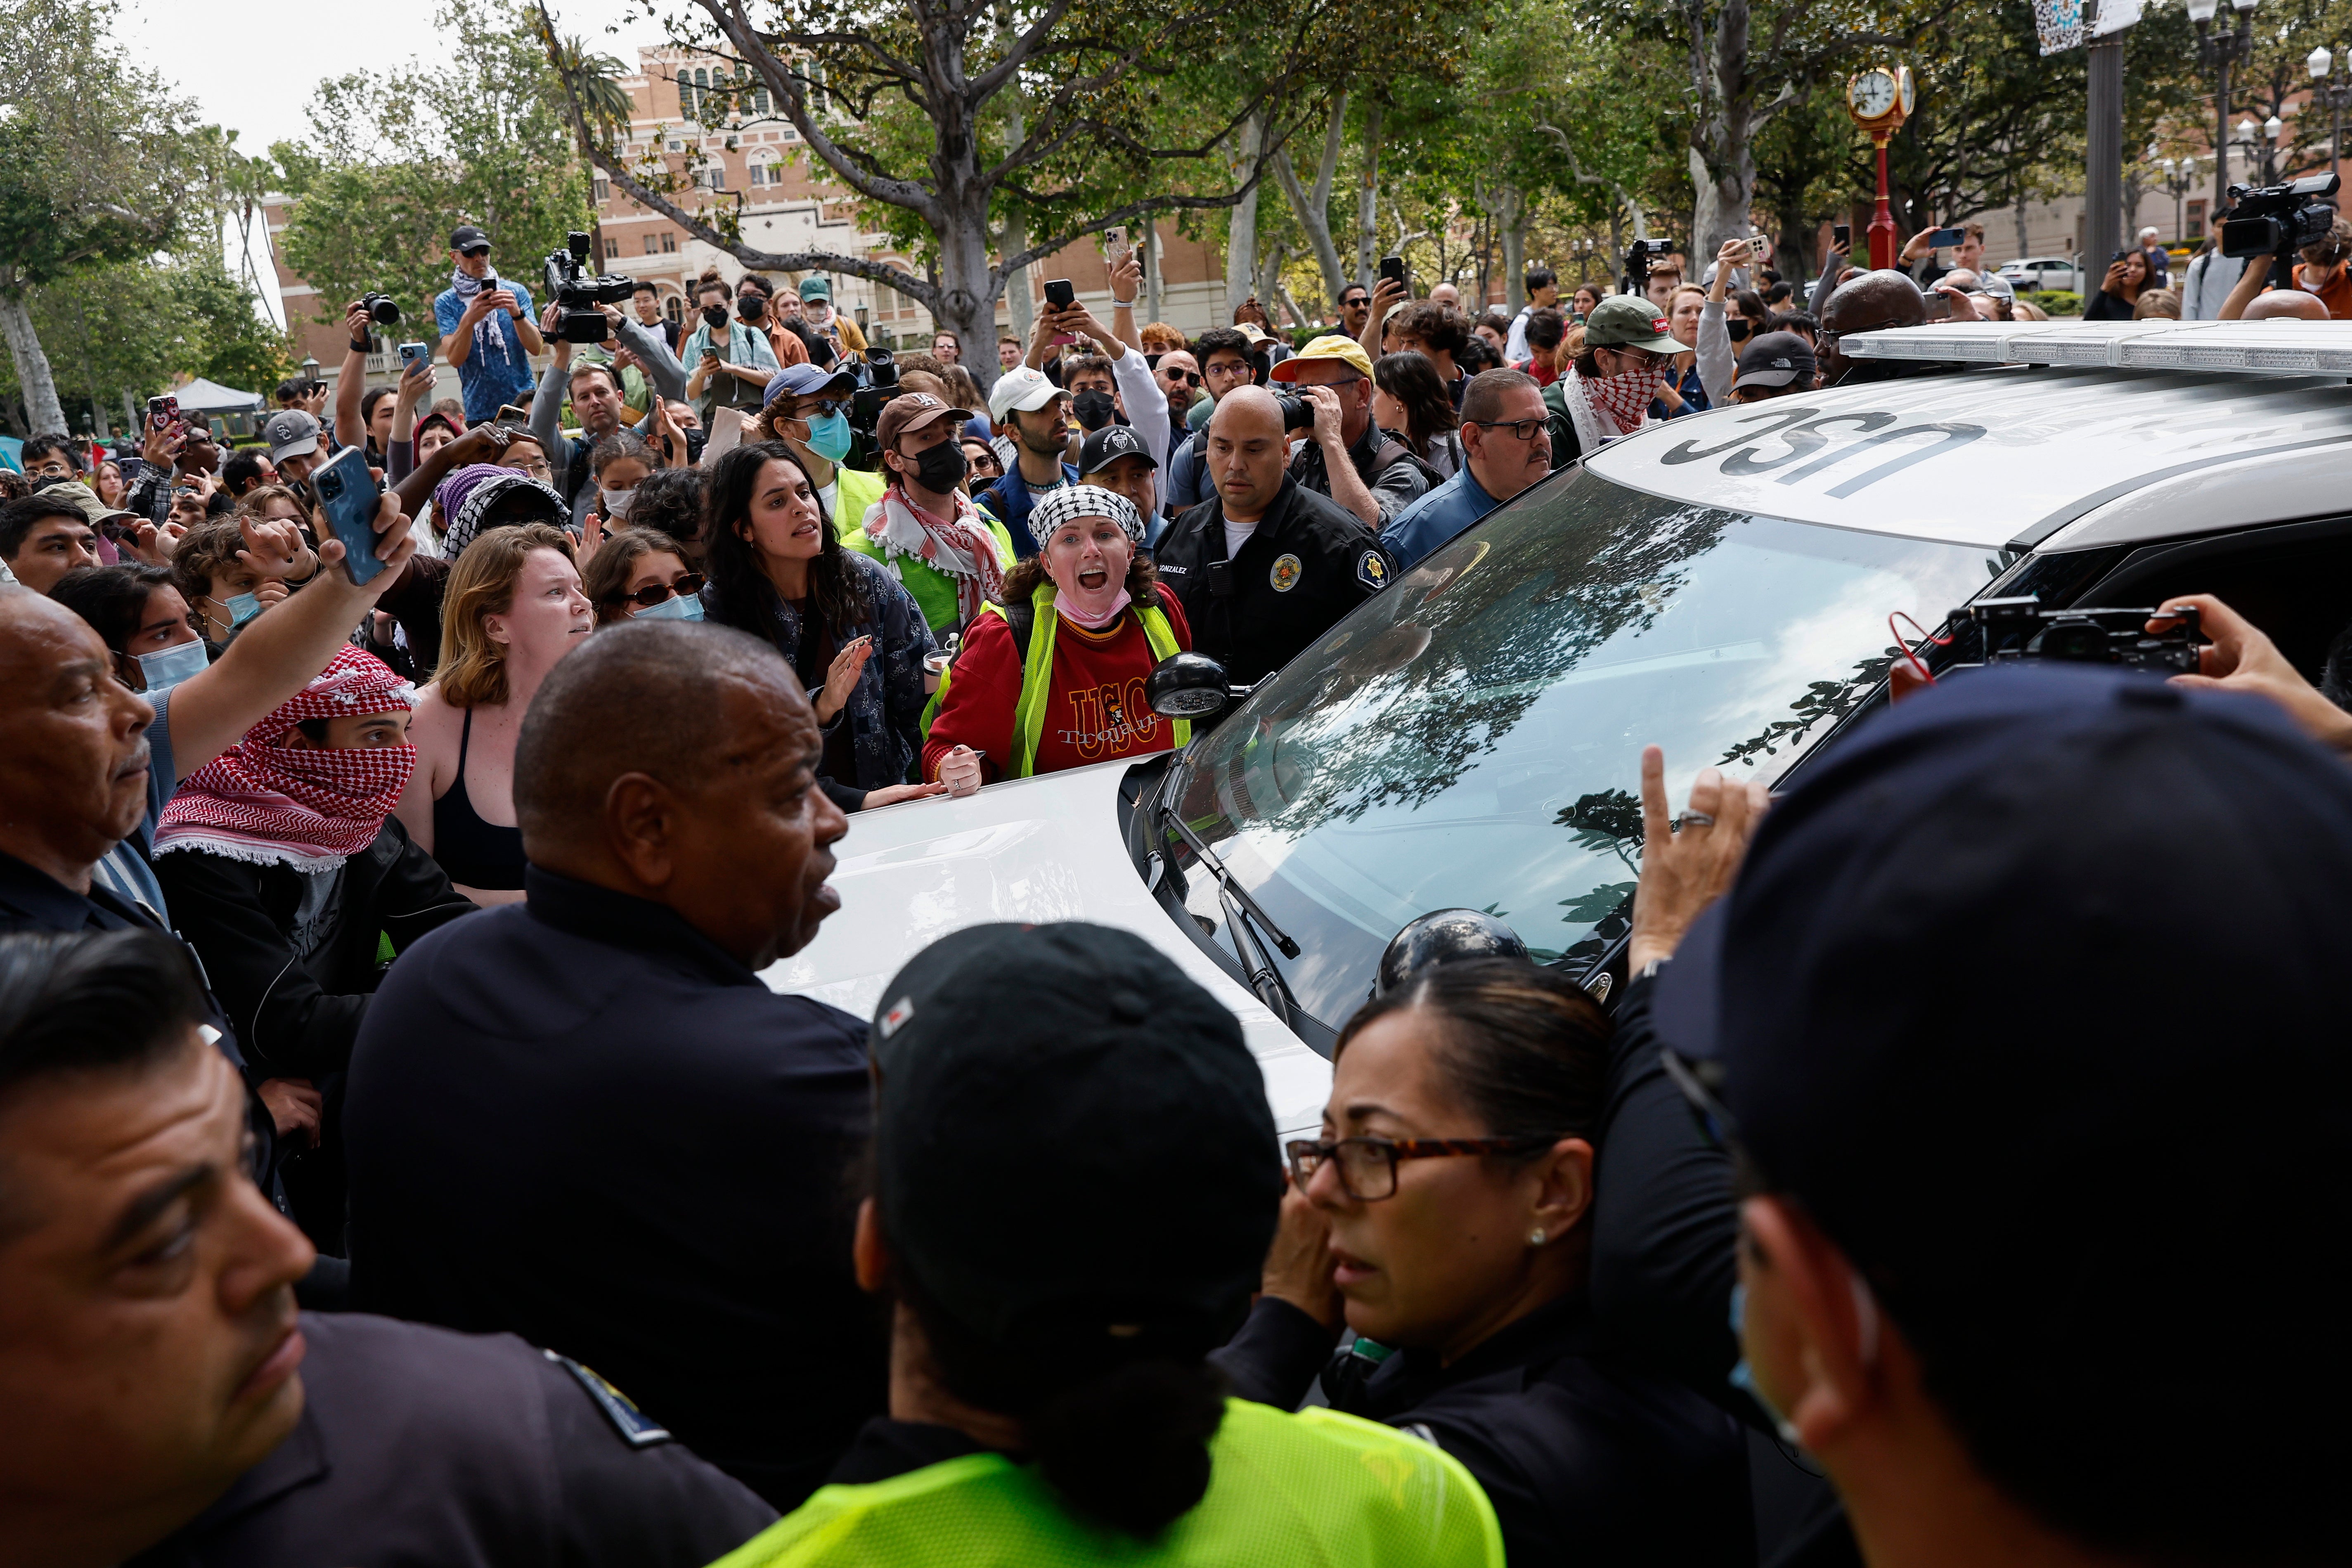 Students and community members clash with USC Public Safety Officers during a Gaza solidarity occupation on campus, with demonstrators blocking a car trying to remove an arrested individual